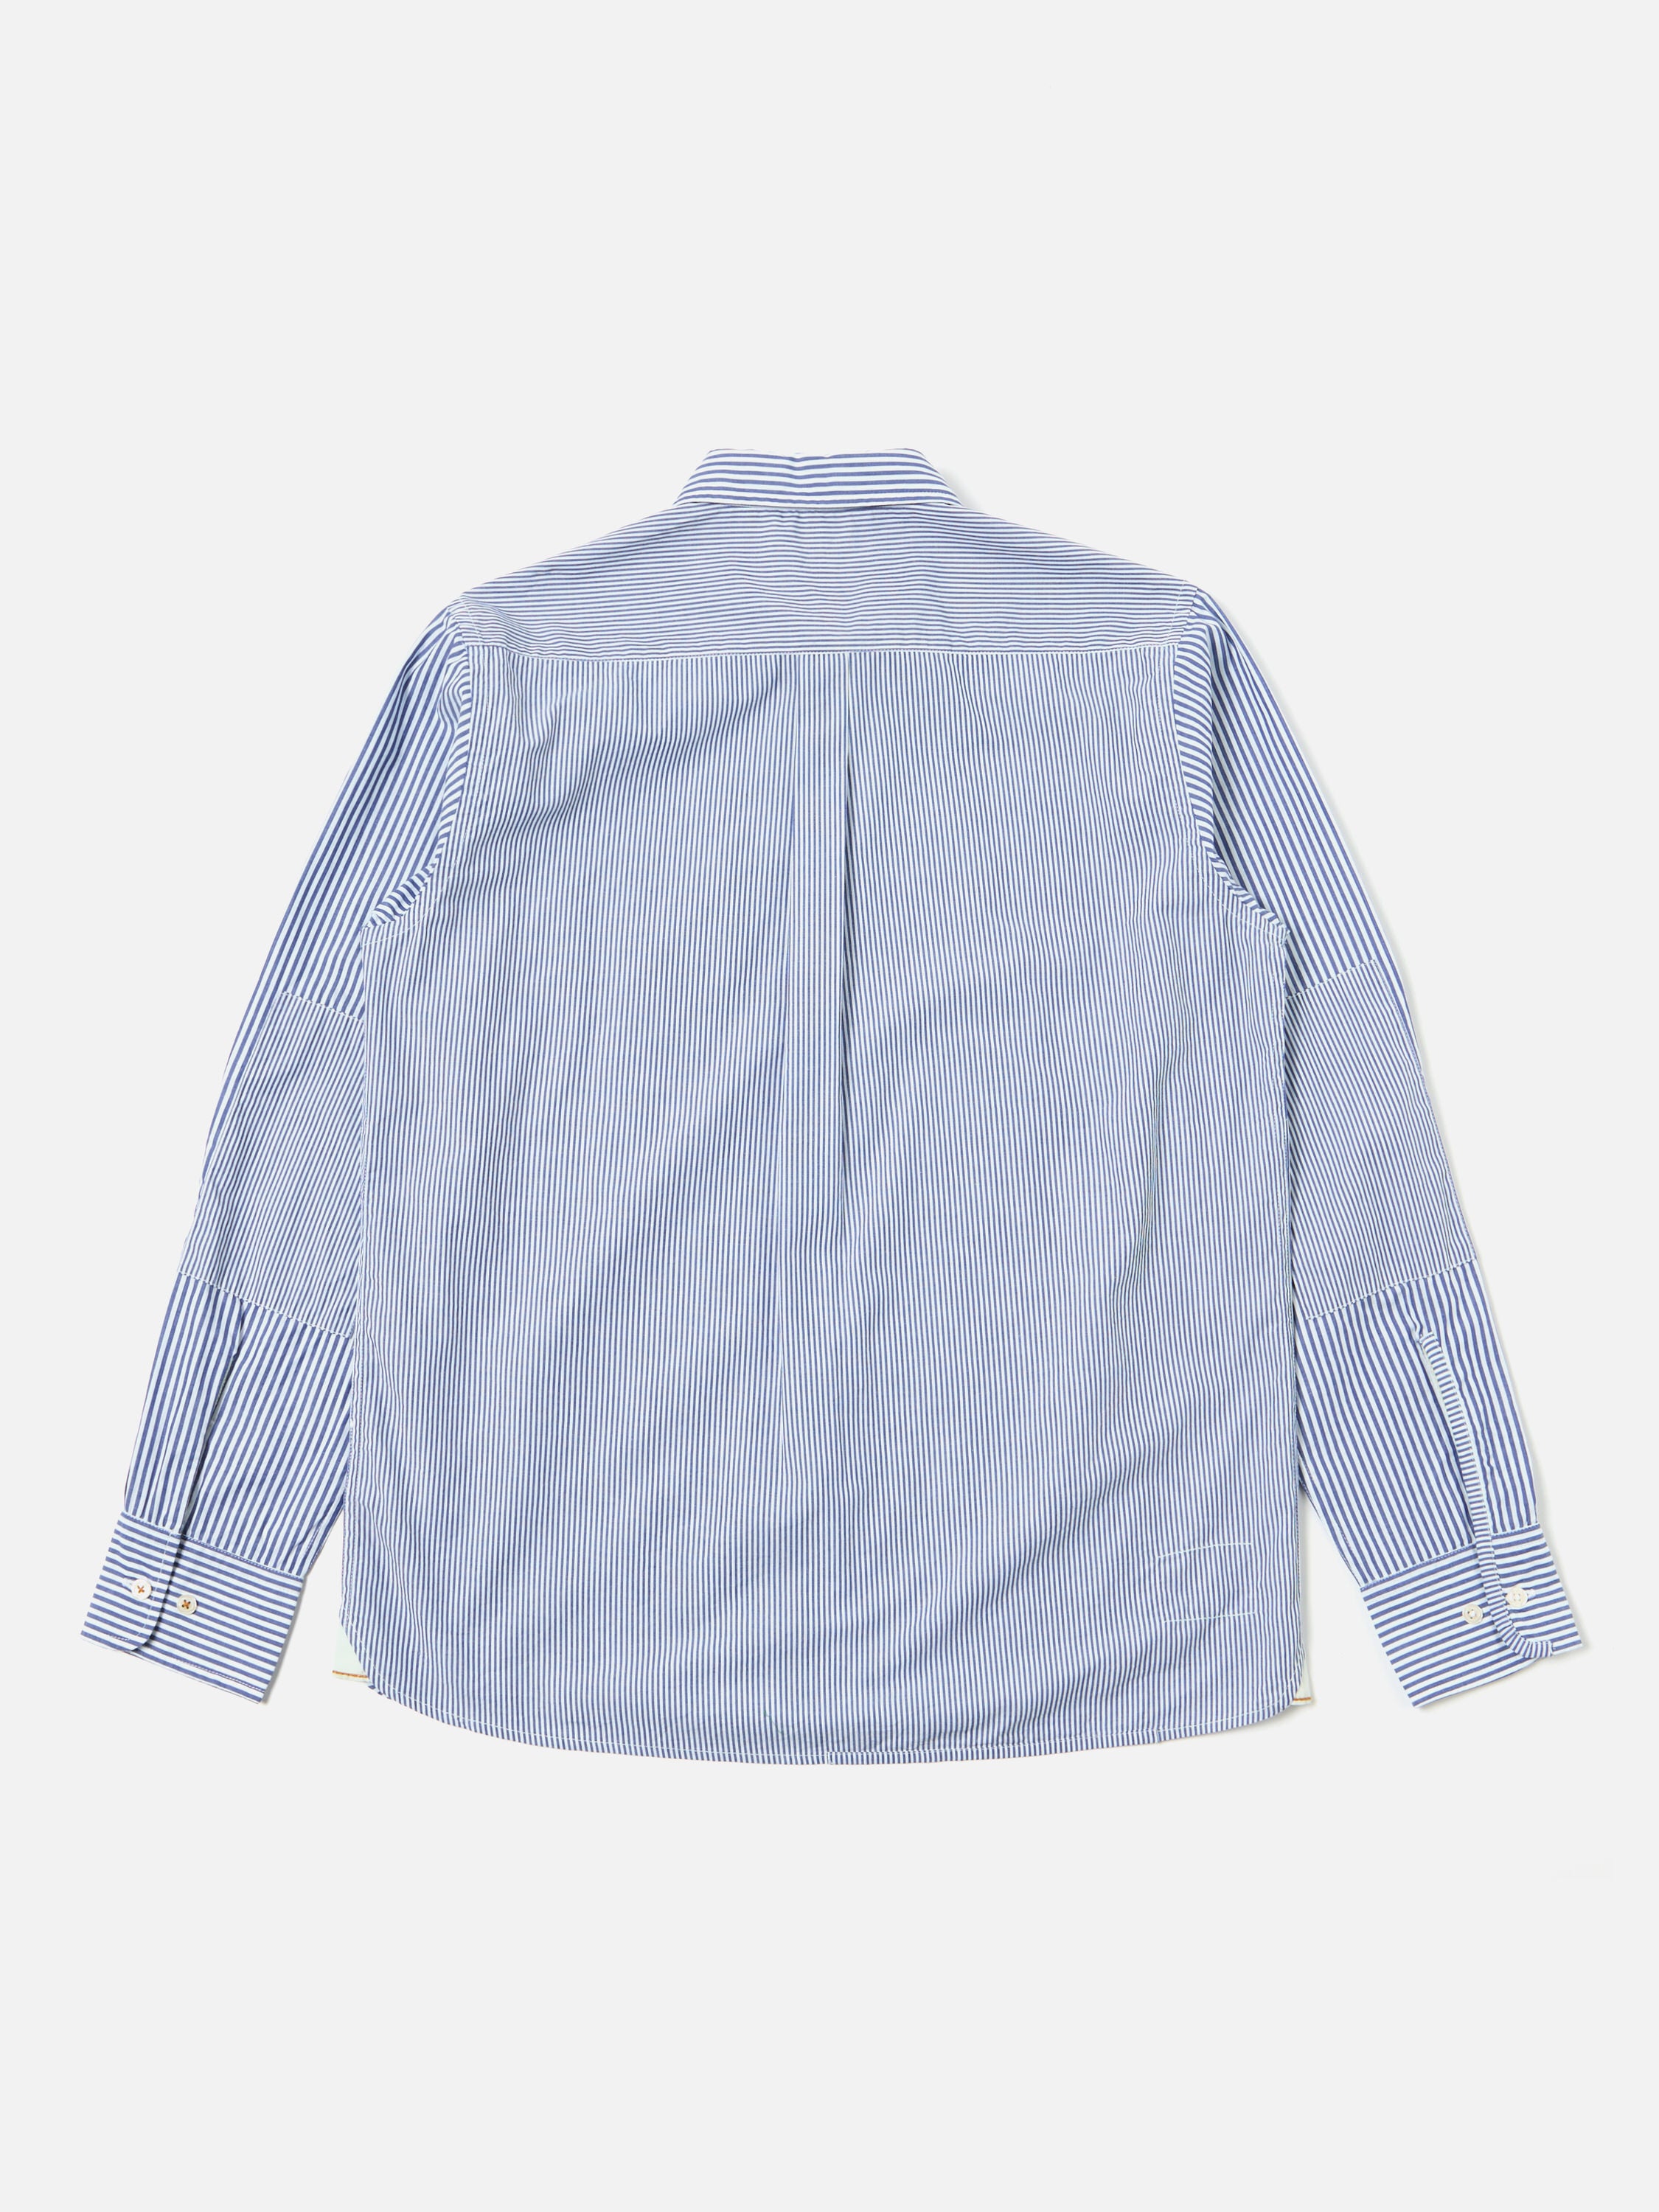 Universal Works L/S Patch Shirt in Blue Classic Stripes